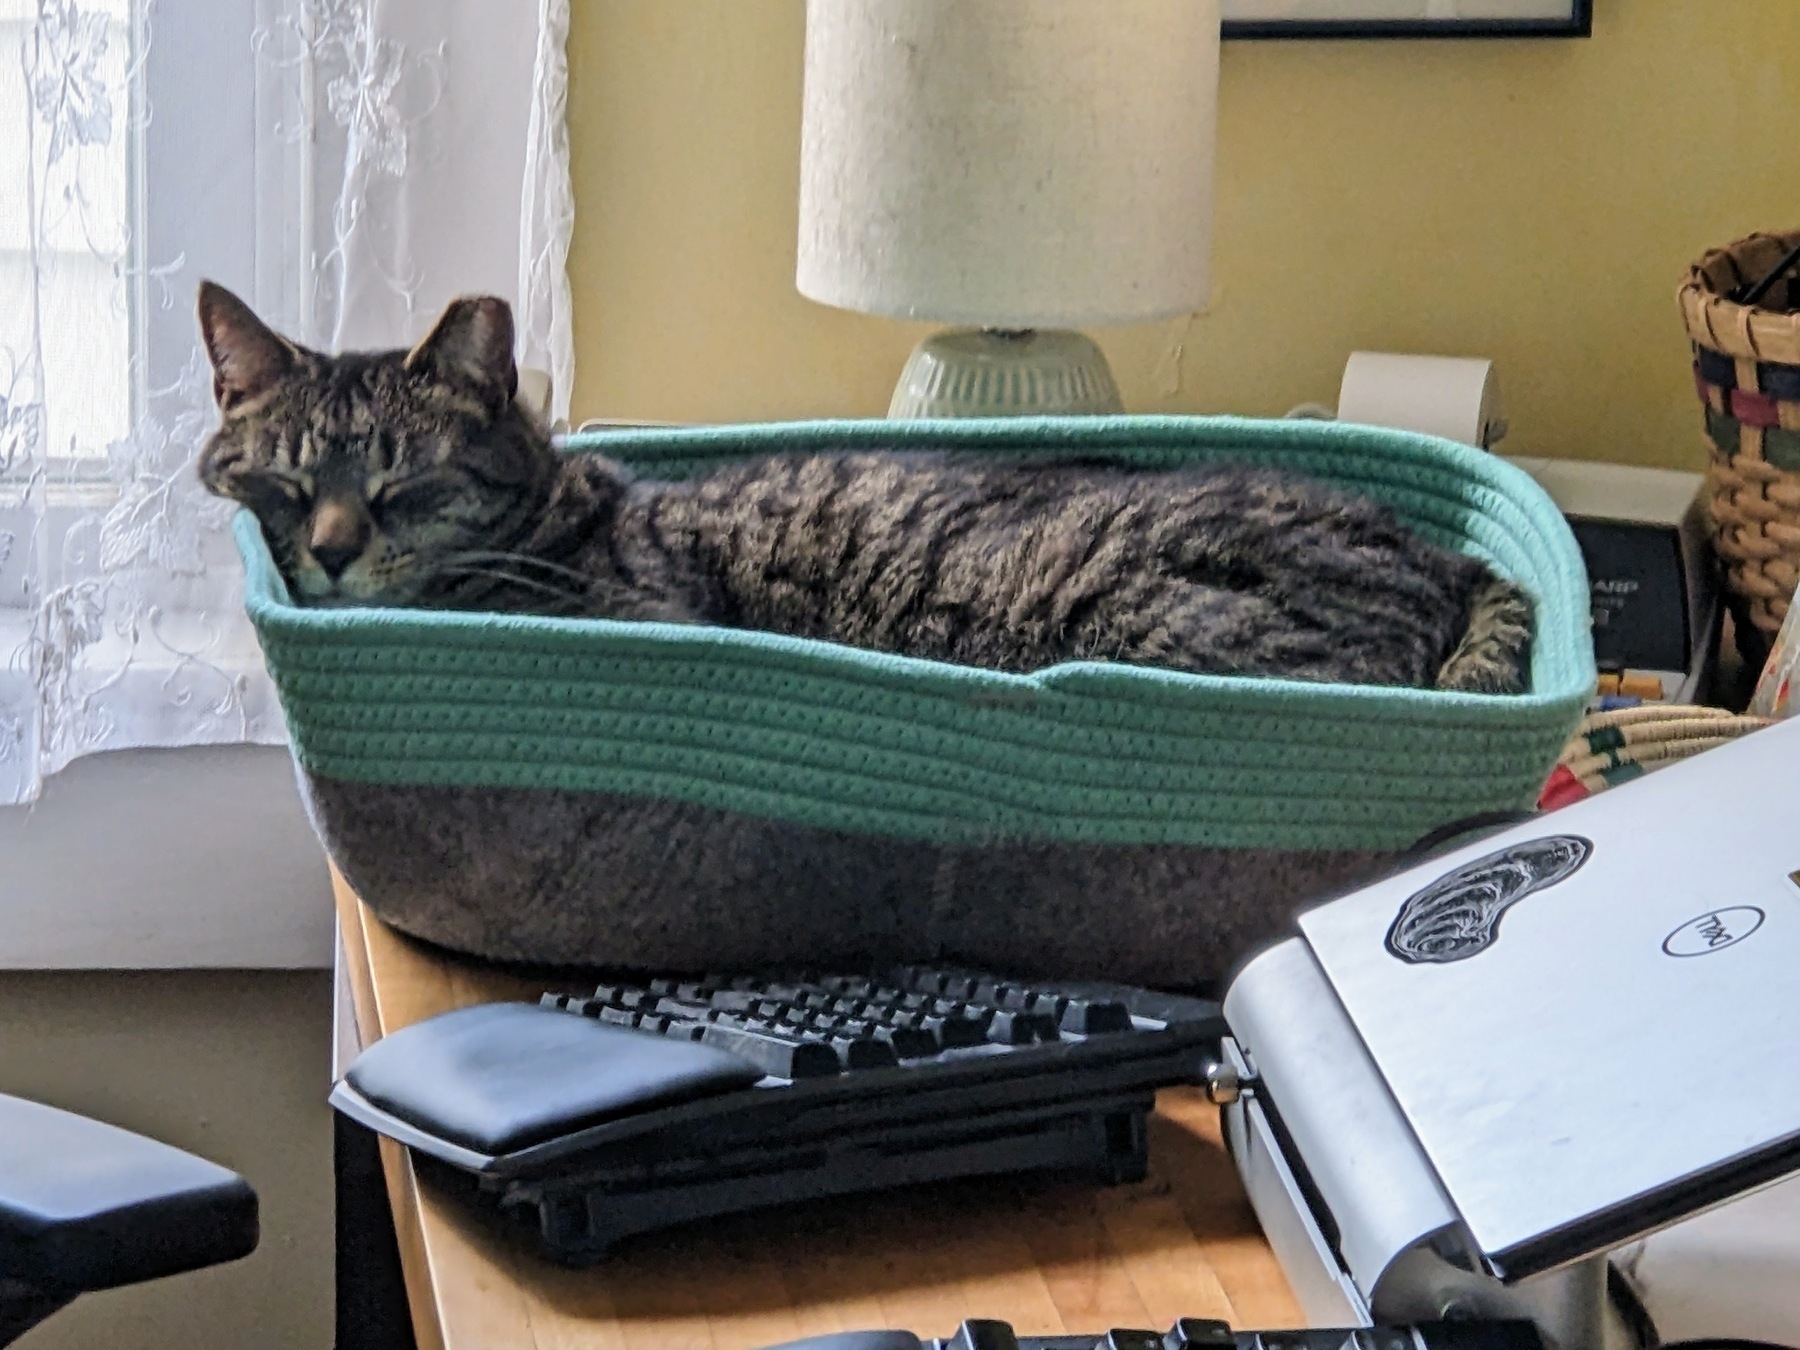 cat resting in basket, next to laptop and keyboard